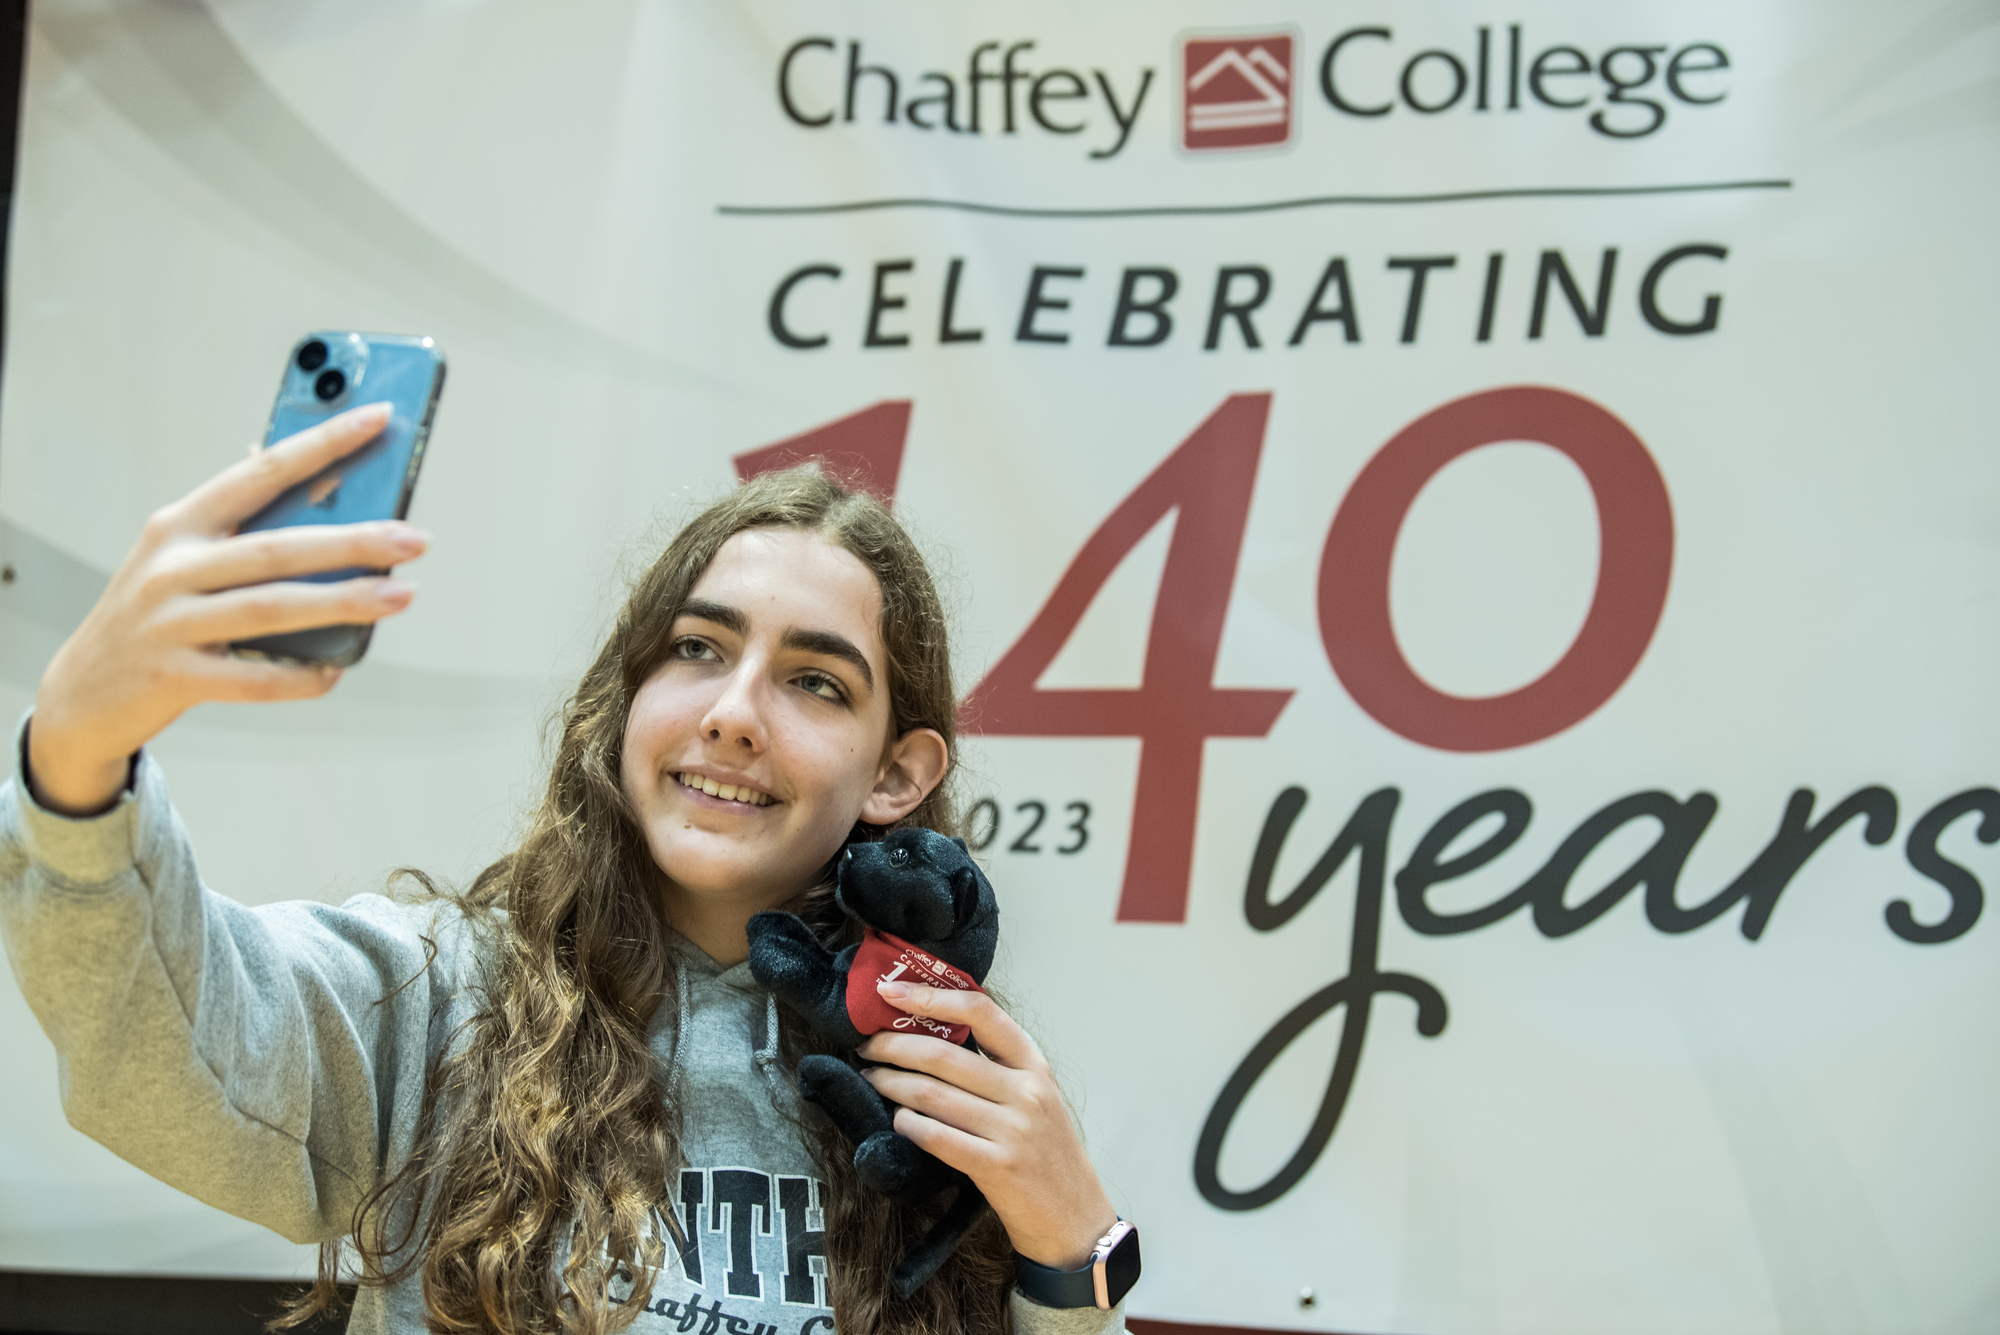 A girl takes a selfie at the Chaffey 140th anniversary celebration.